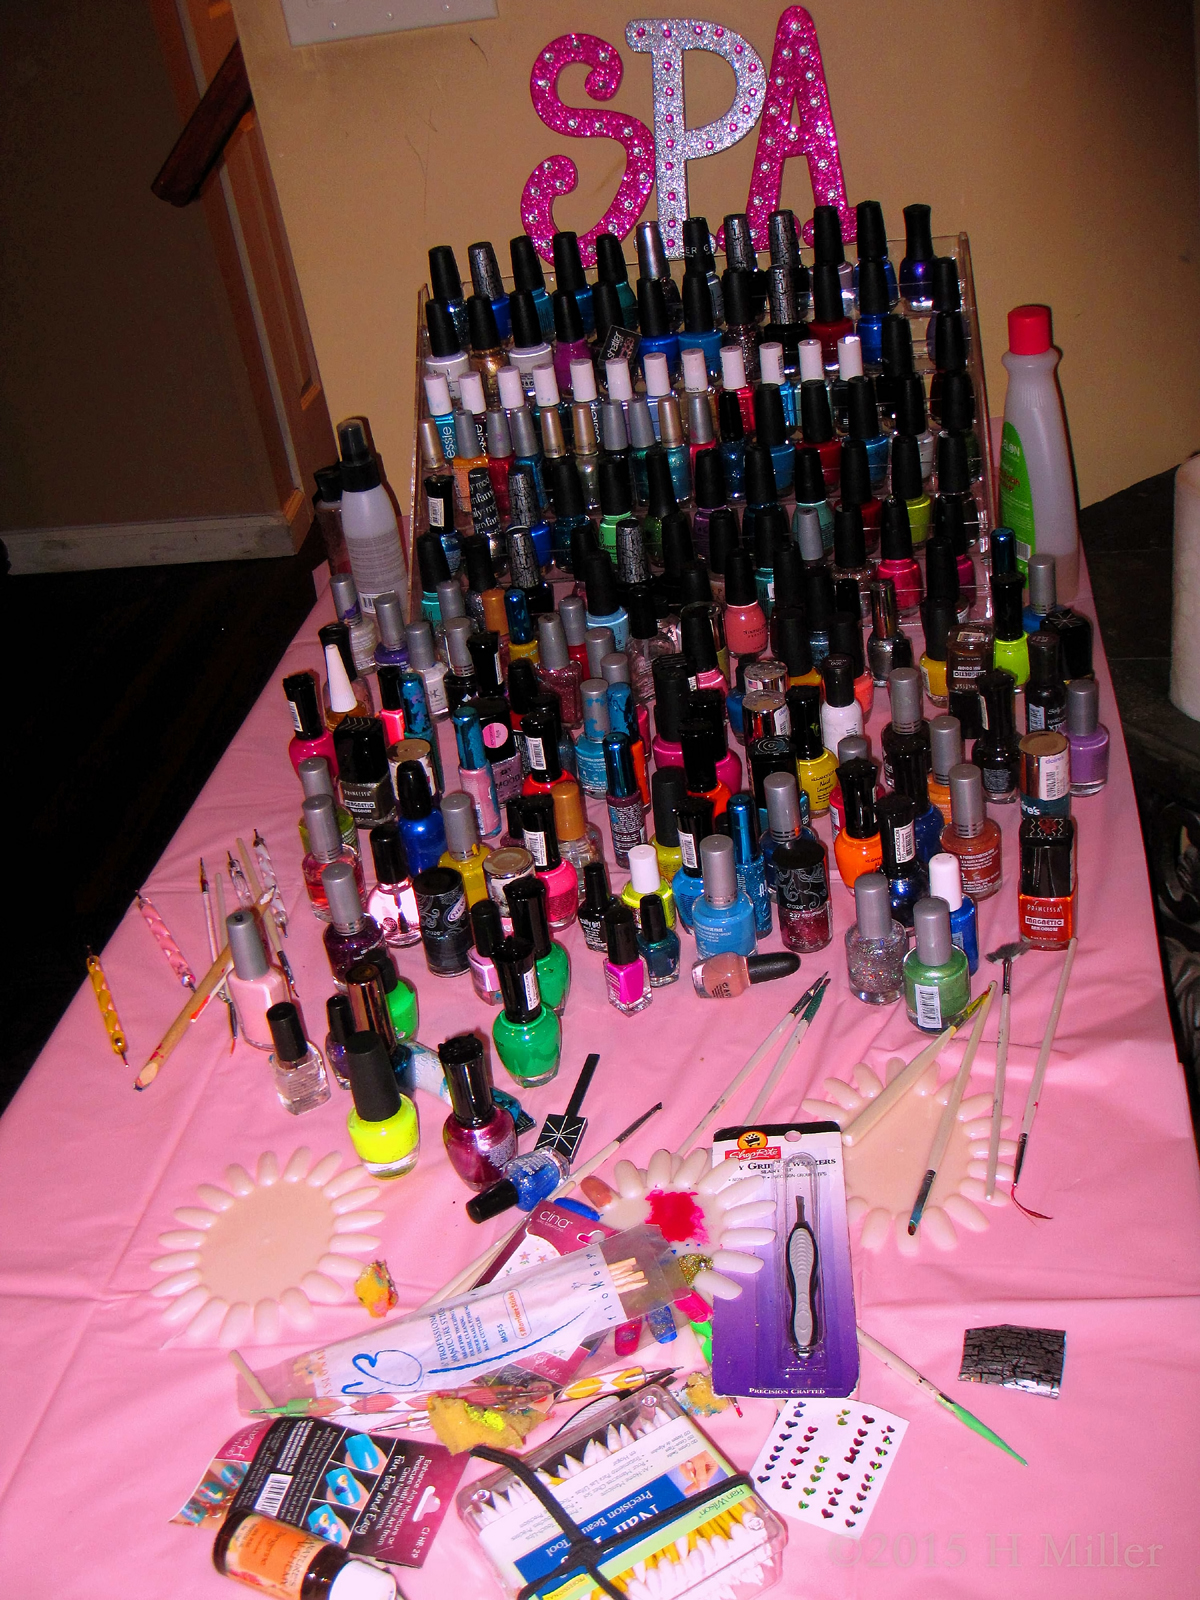 Home Spa Party Nail Art Area.